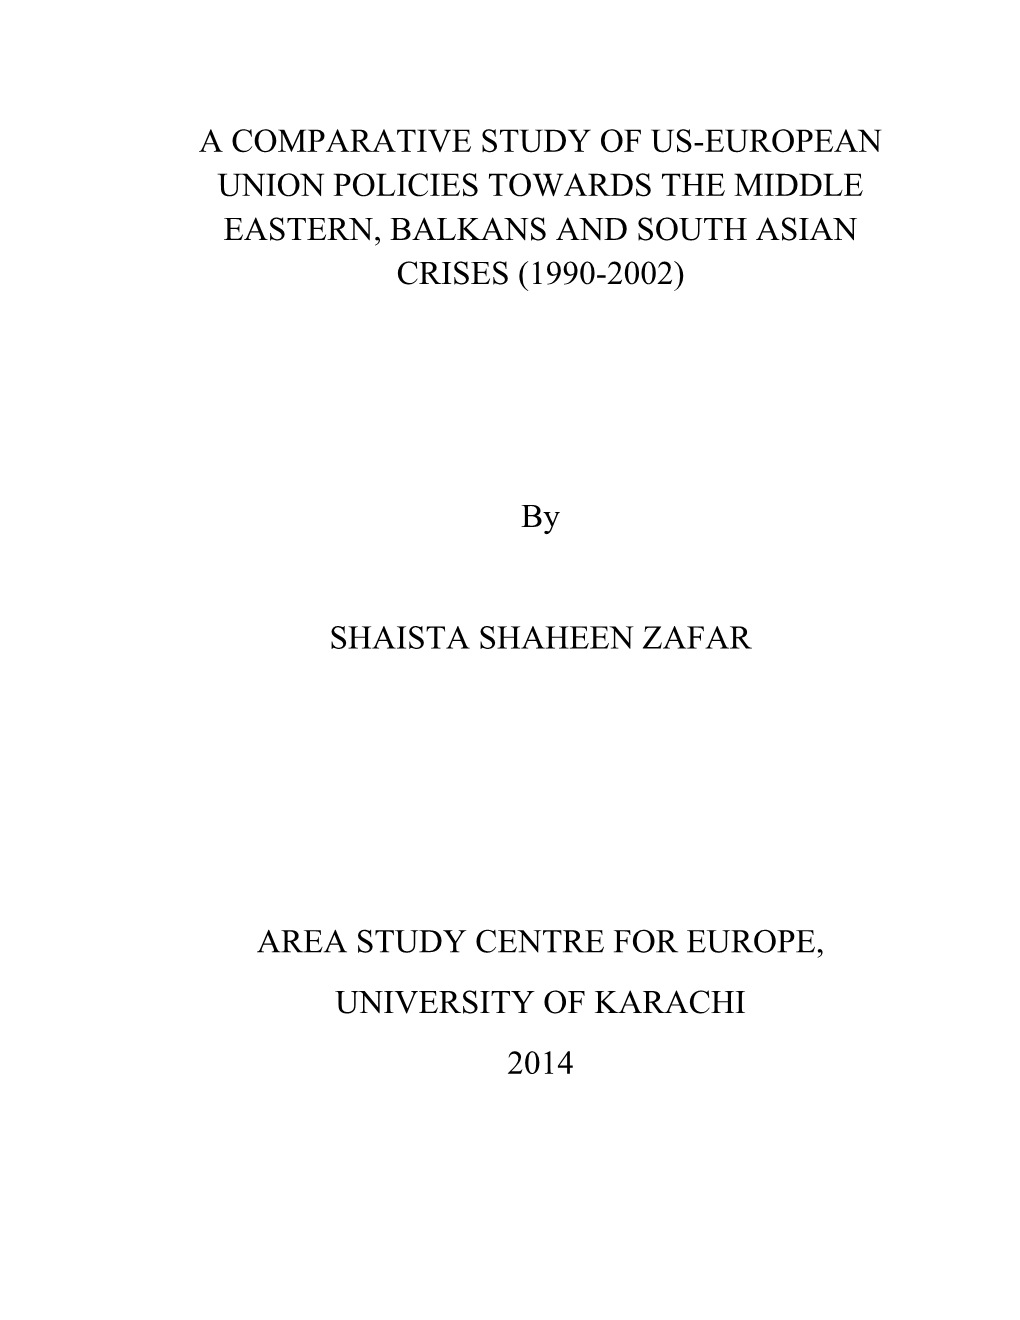 A Comparative Study of Us-European Union Policies Towards the Middle Eastern, Balkans and South Asian Crises (1990-2002)